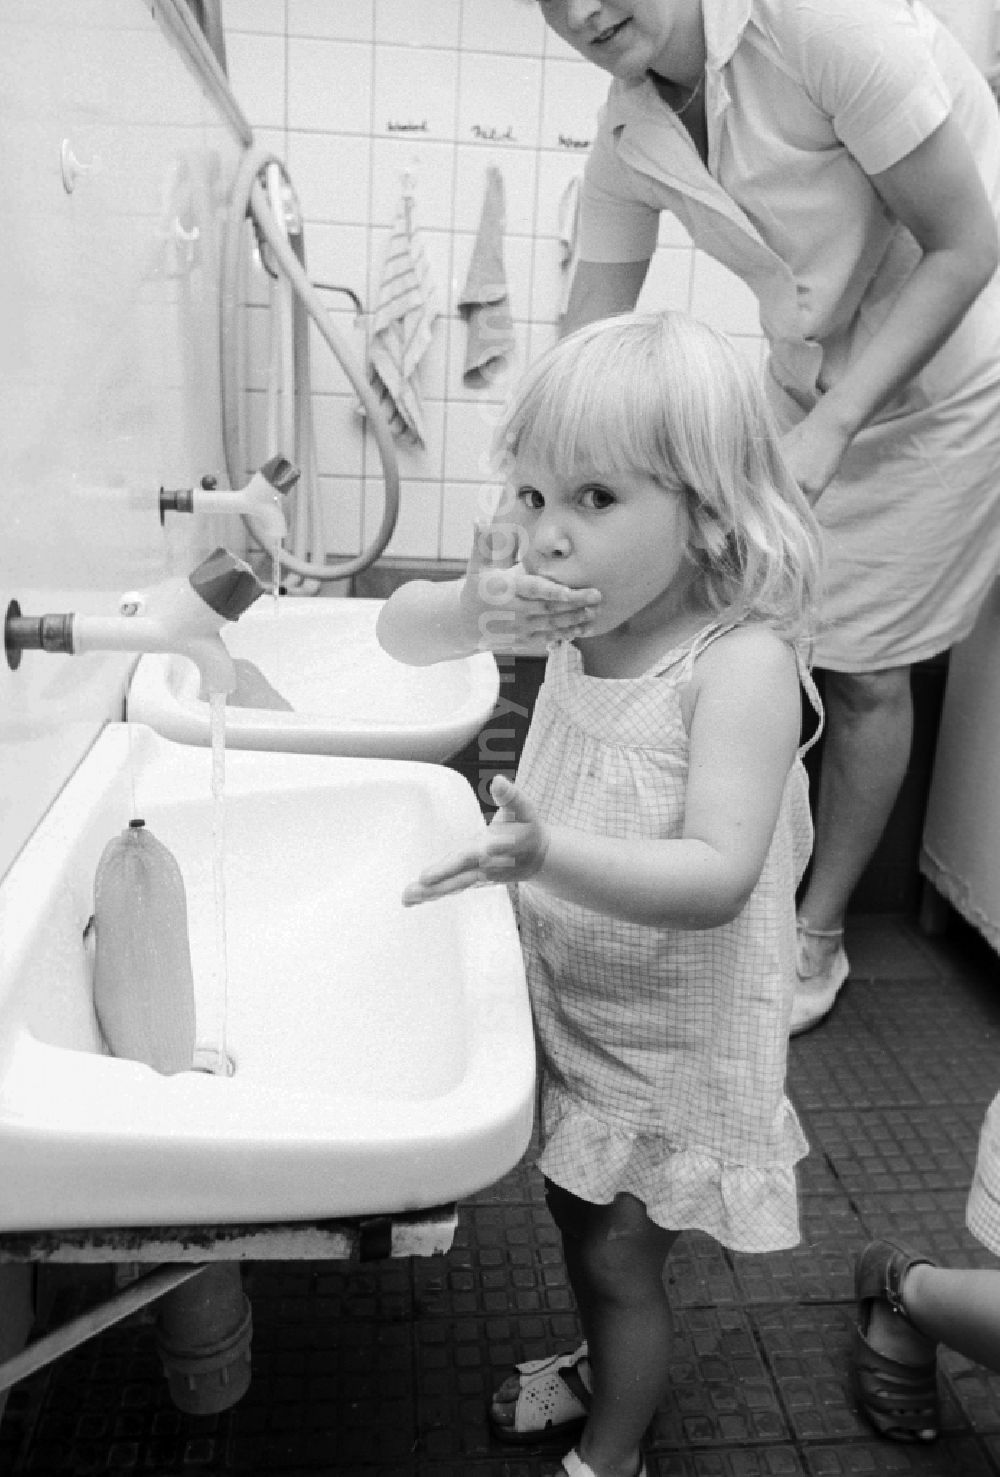 GDR photo archive: Berlin - The educator helps children in the hand wash in the wash basin in a children cooked in Berlin, the former capital of the GDR, German democratic republic